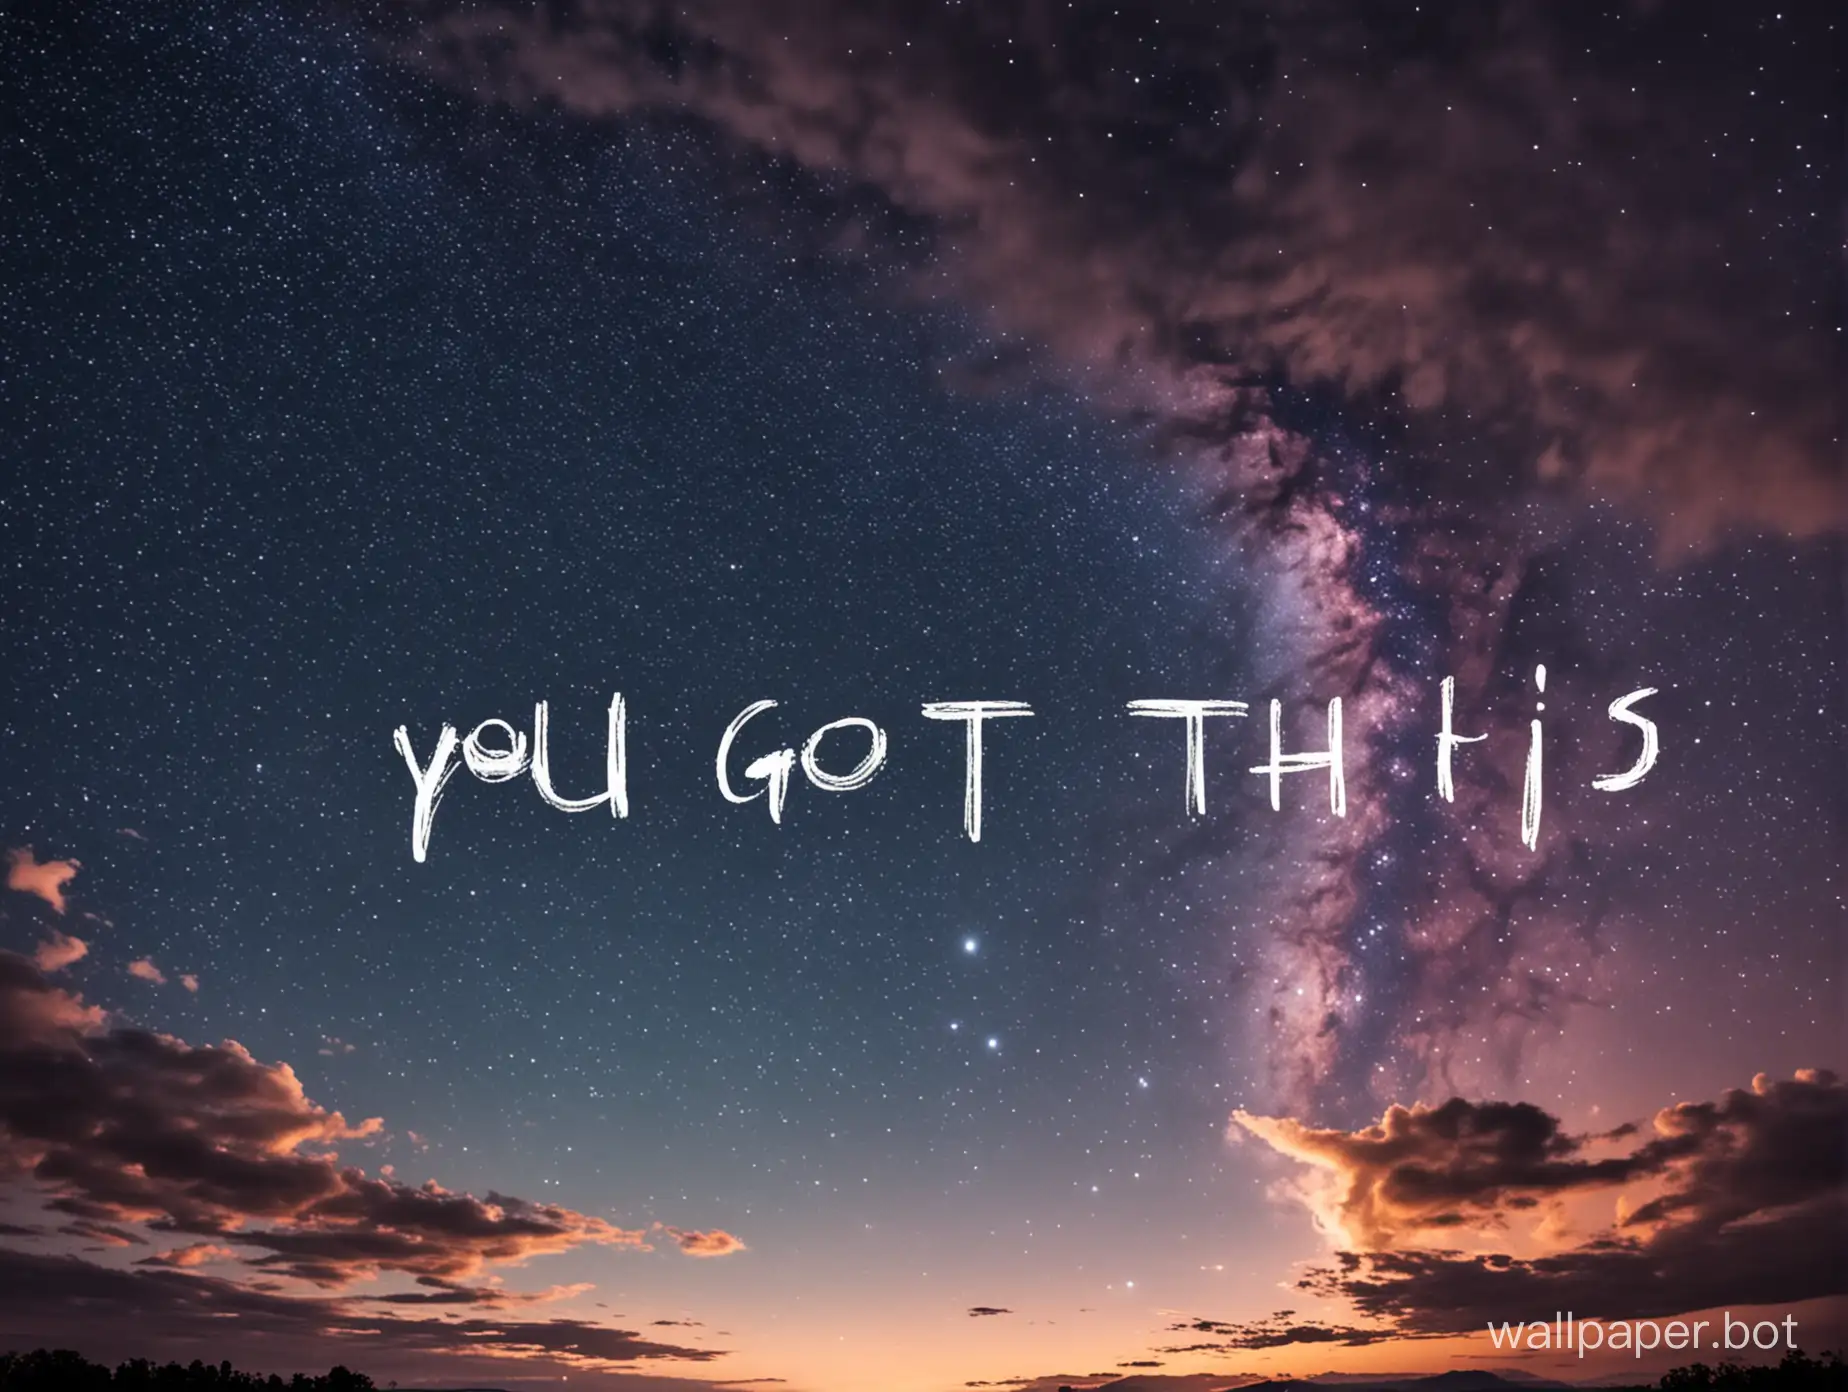 Inspirational-Night-Sky-with-Motivational-Text-You-Got-This